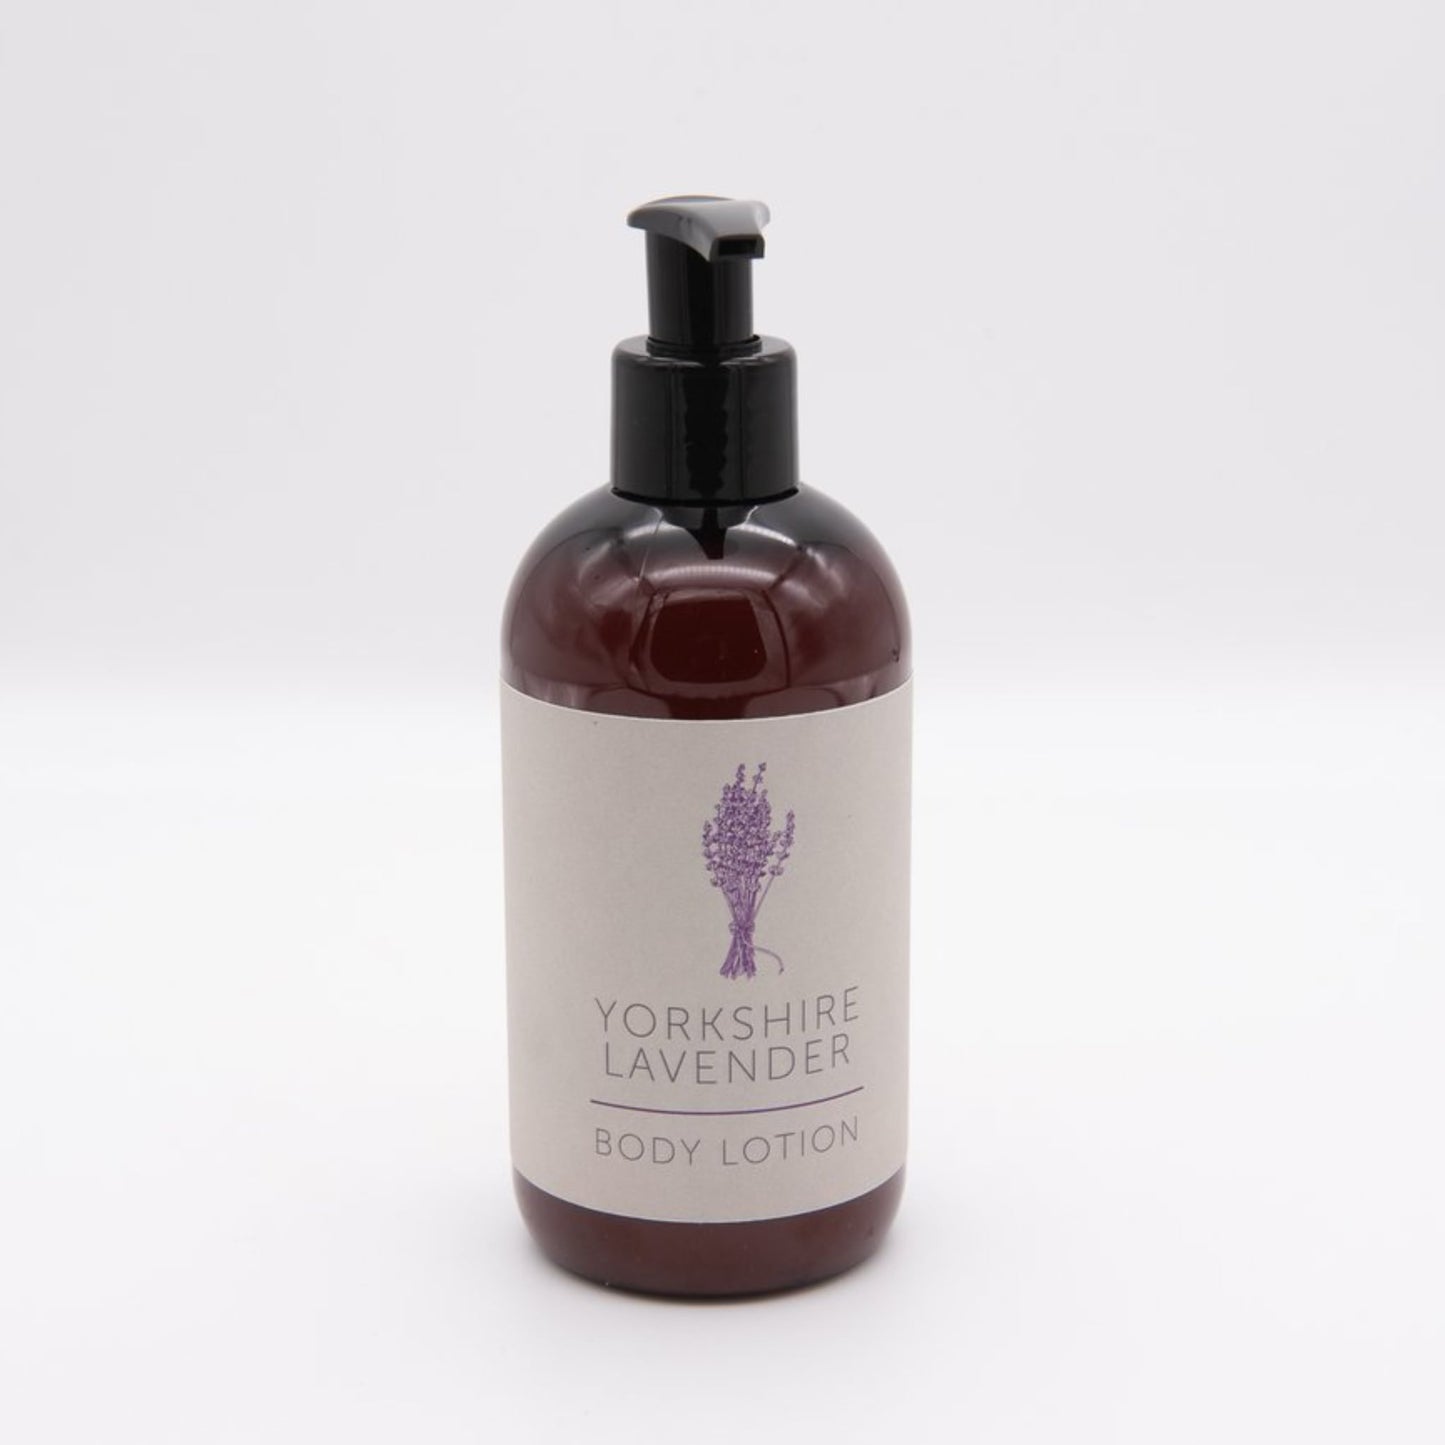 Yorkshire Lavender Body Lotion - The Great Yorkshire Shop